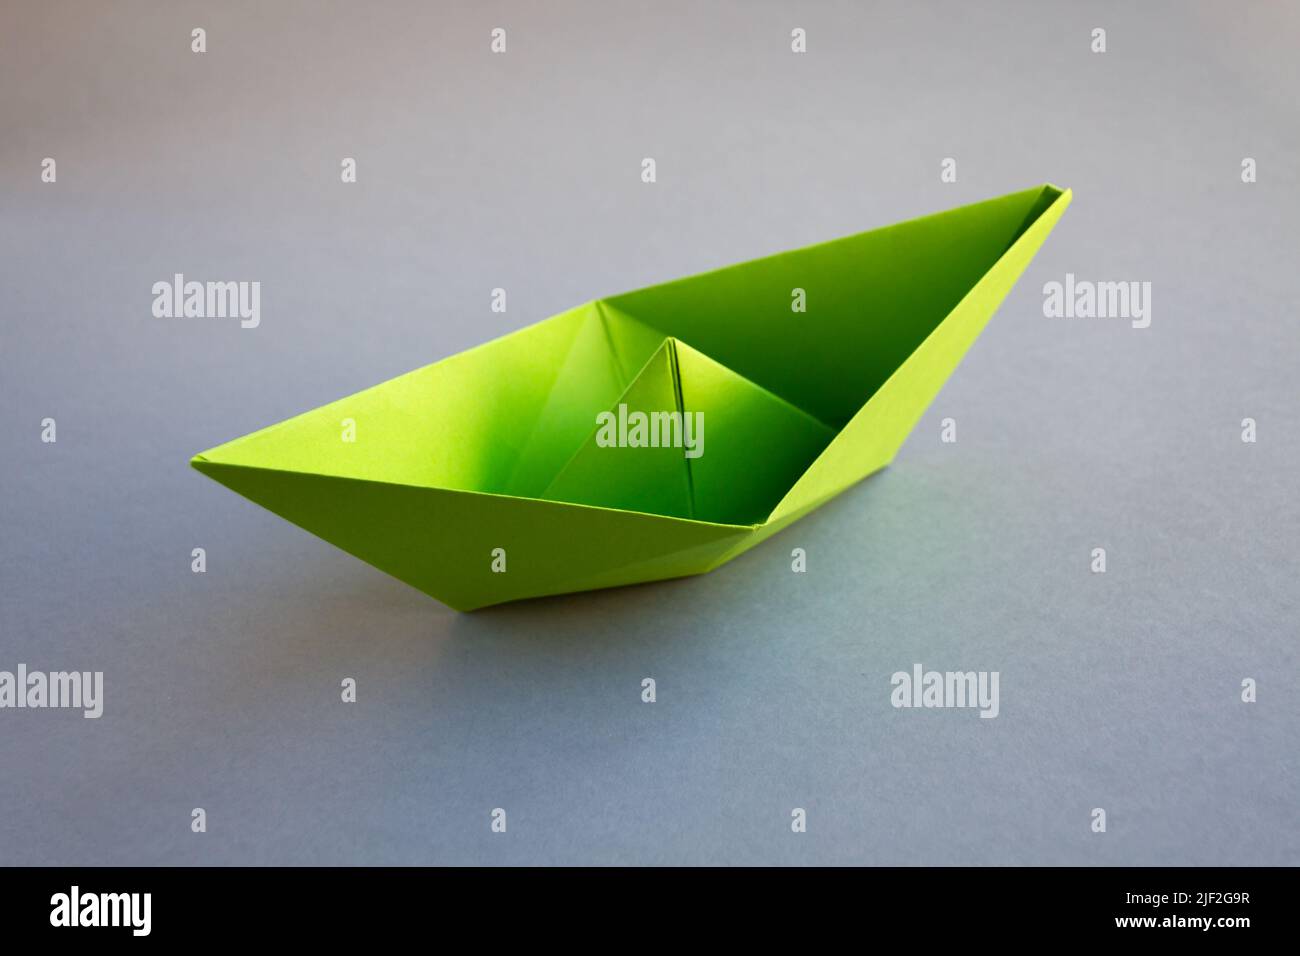 Green paper boat origami isolated on a blank grey background. Stock Photo